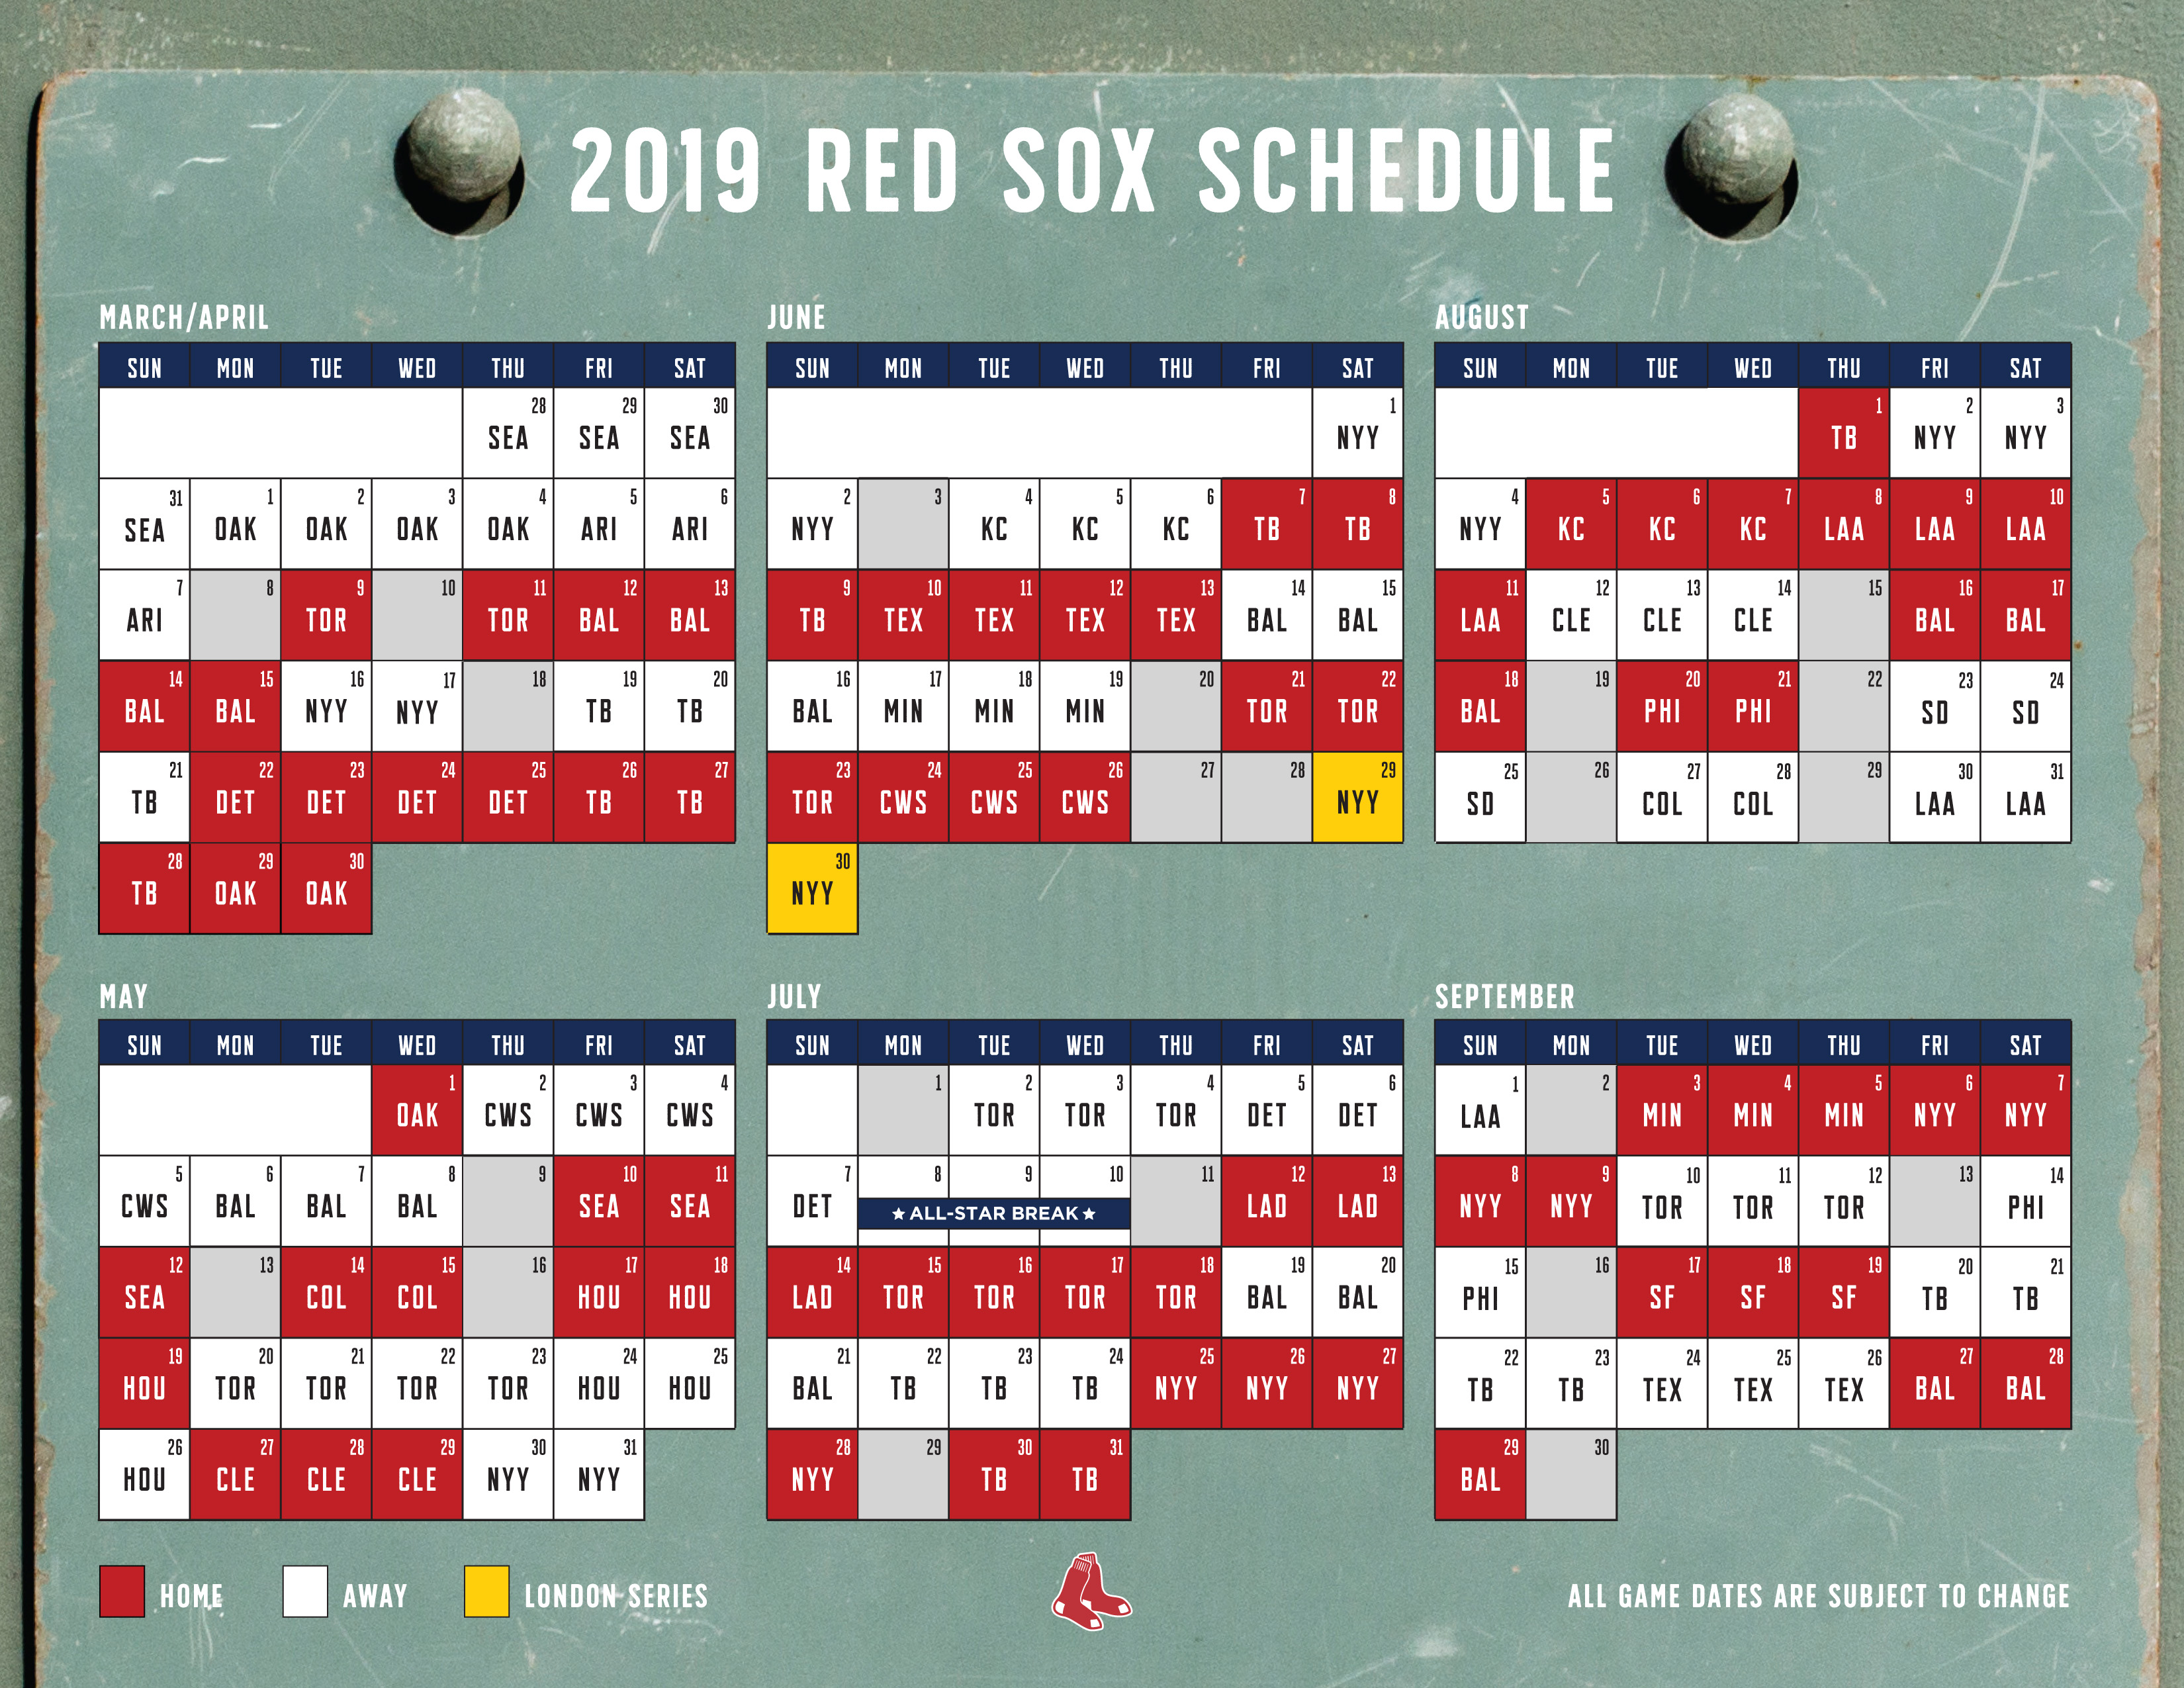 Here's the Red Sox schedule for the 2019 season